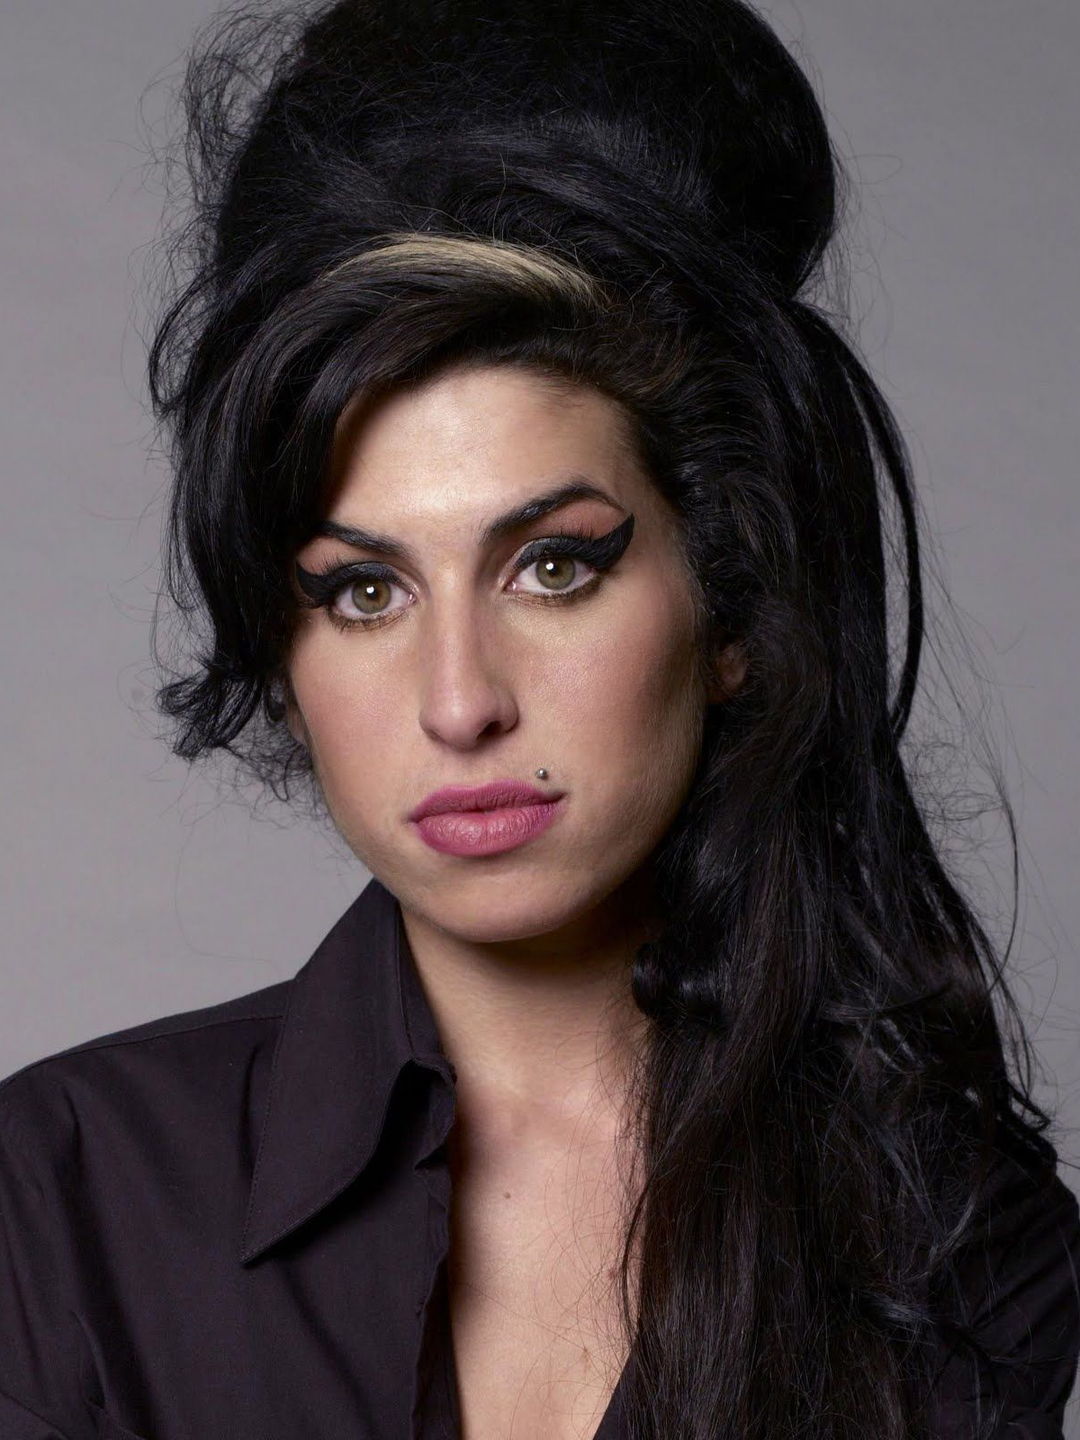 Amy Winehouse in her teens